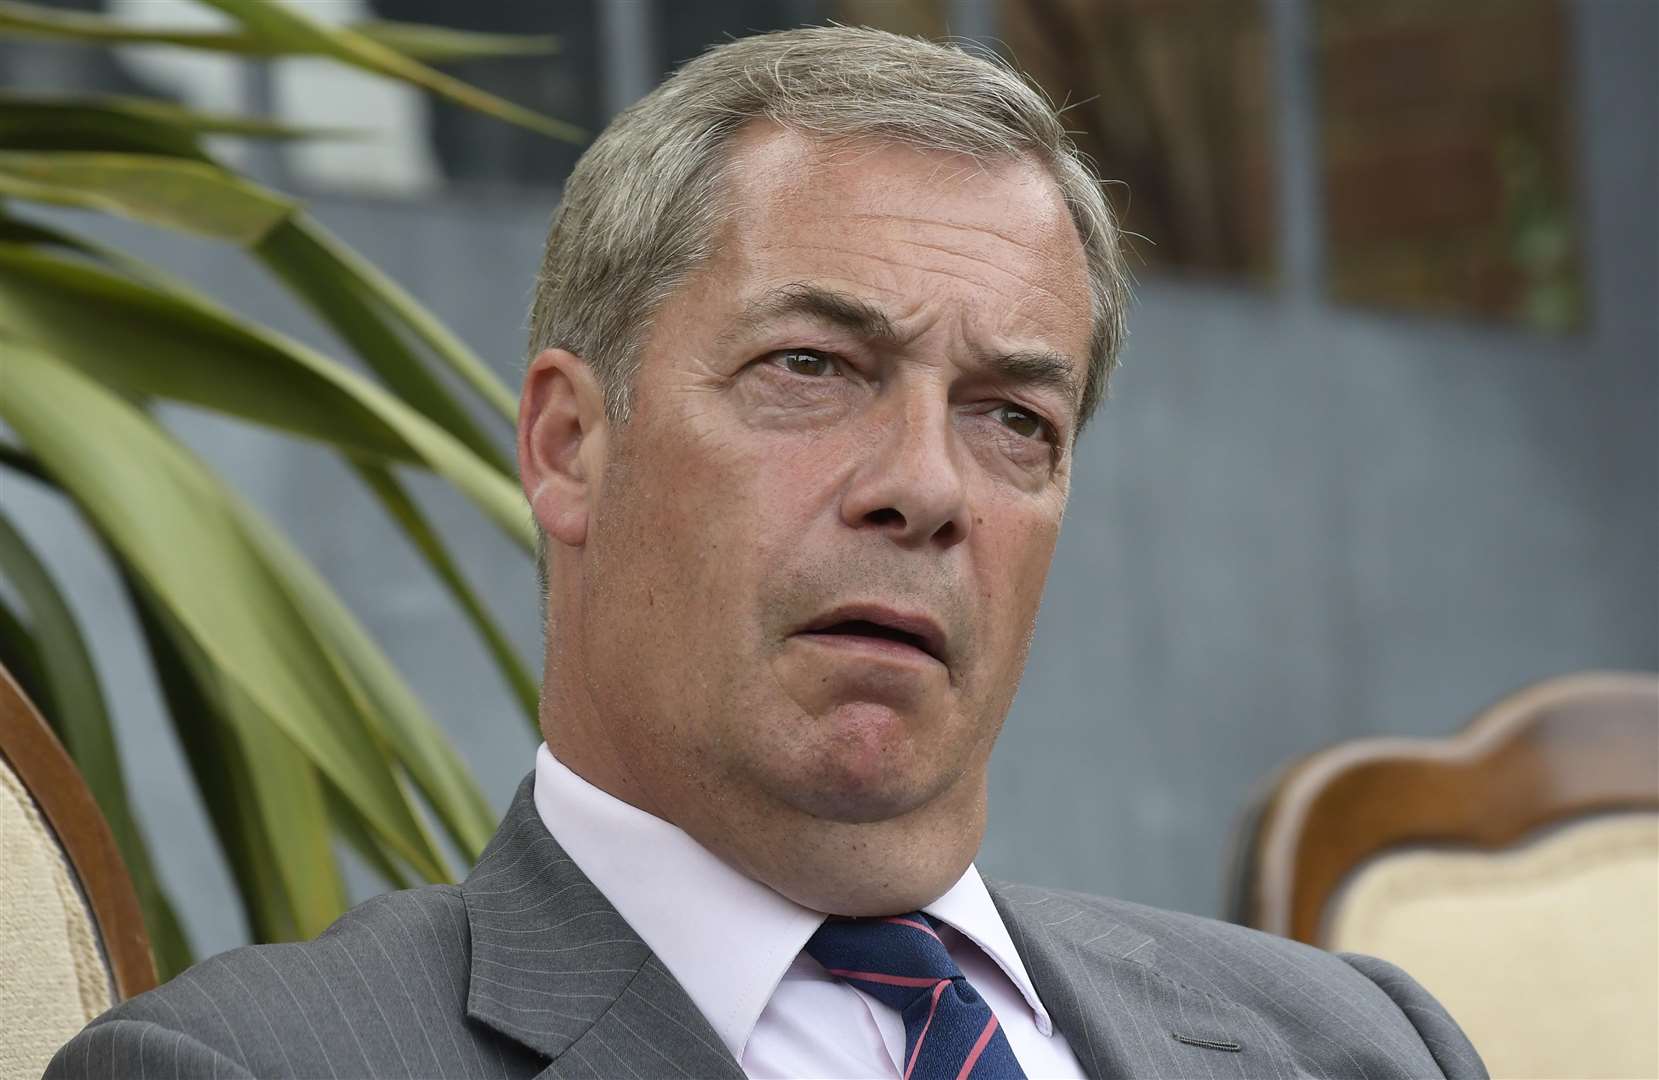 Nigel Farage, who ran for MP in Thanet South, was left speechless during his LBC show